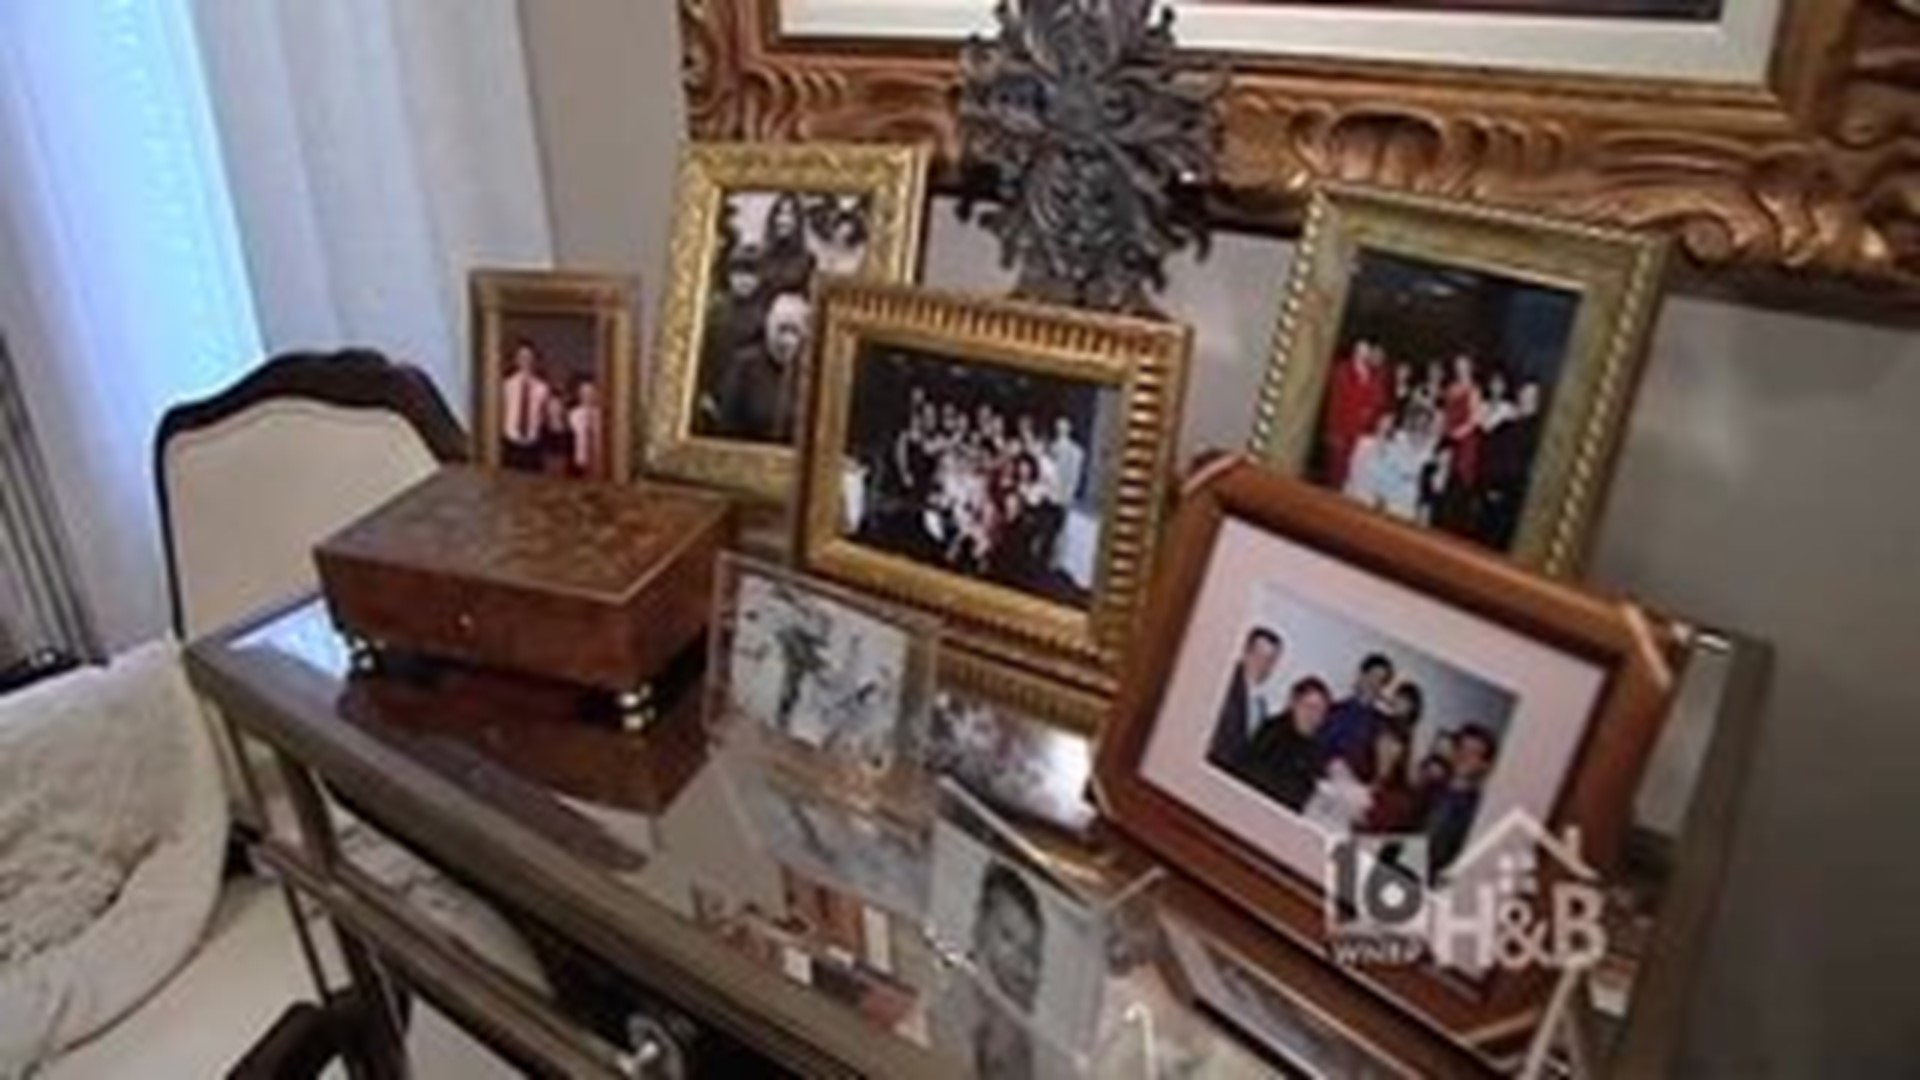 David Fritz: Decorating with Collectibles